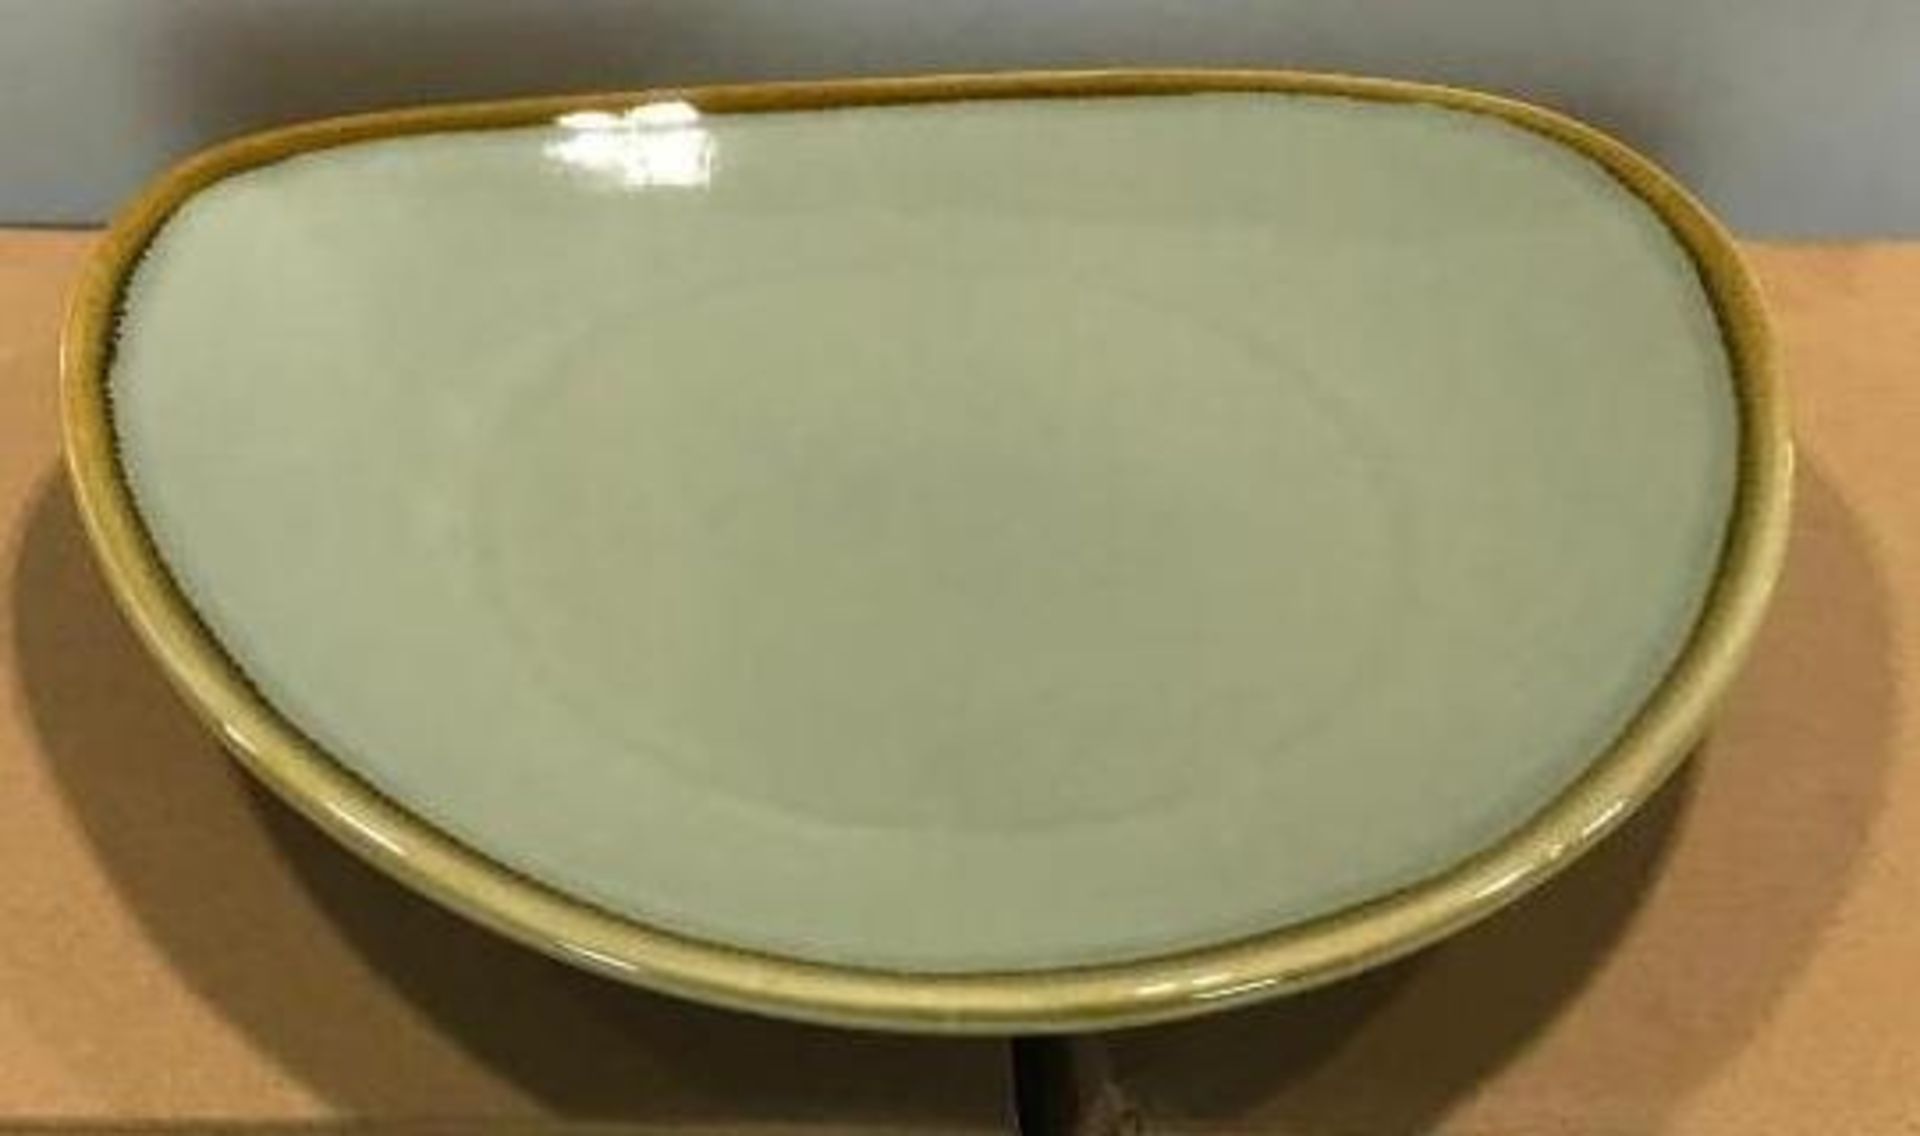 2 CASES OF TERRASTONE 11" SAGE GREEN PLATE - 12/CASE, ARCOROC - NEW - Image 3 of 3